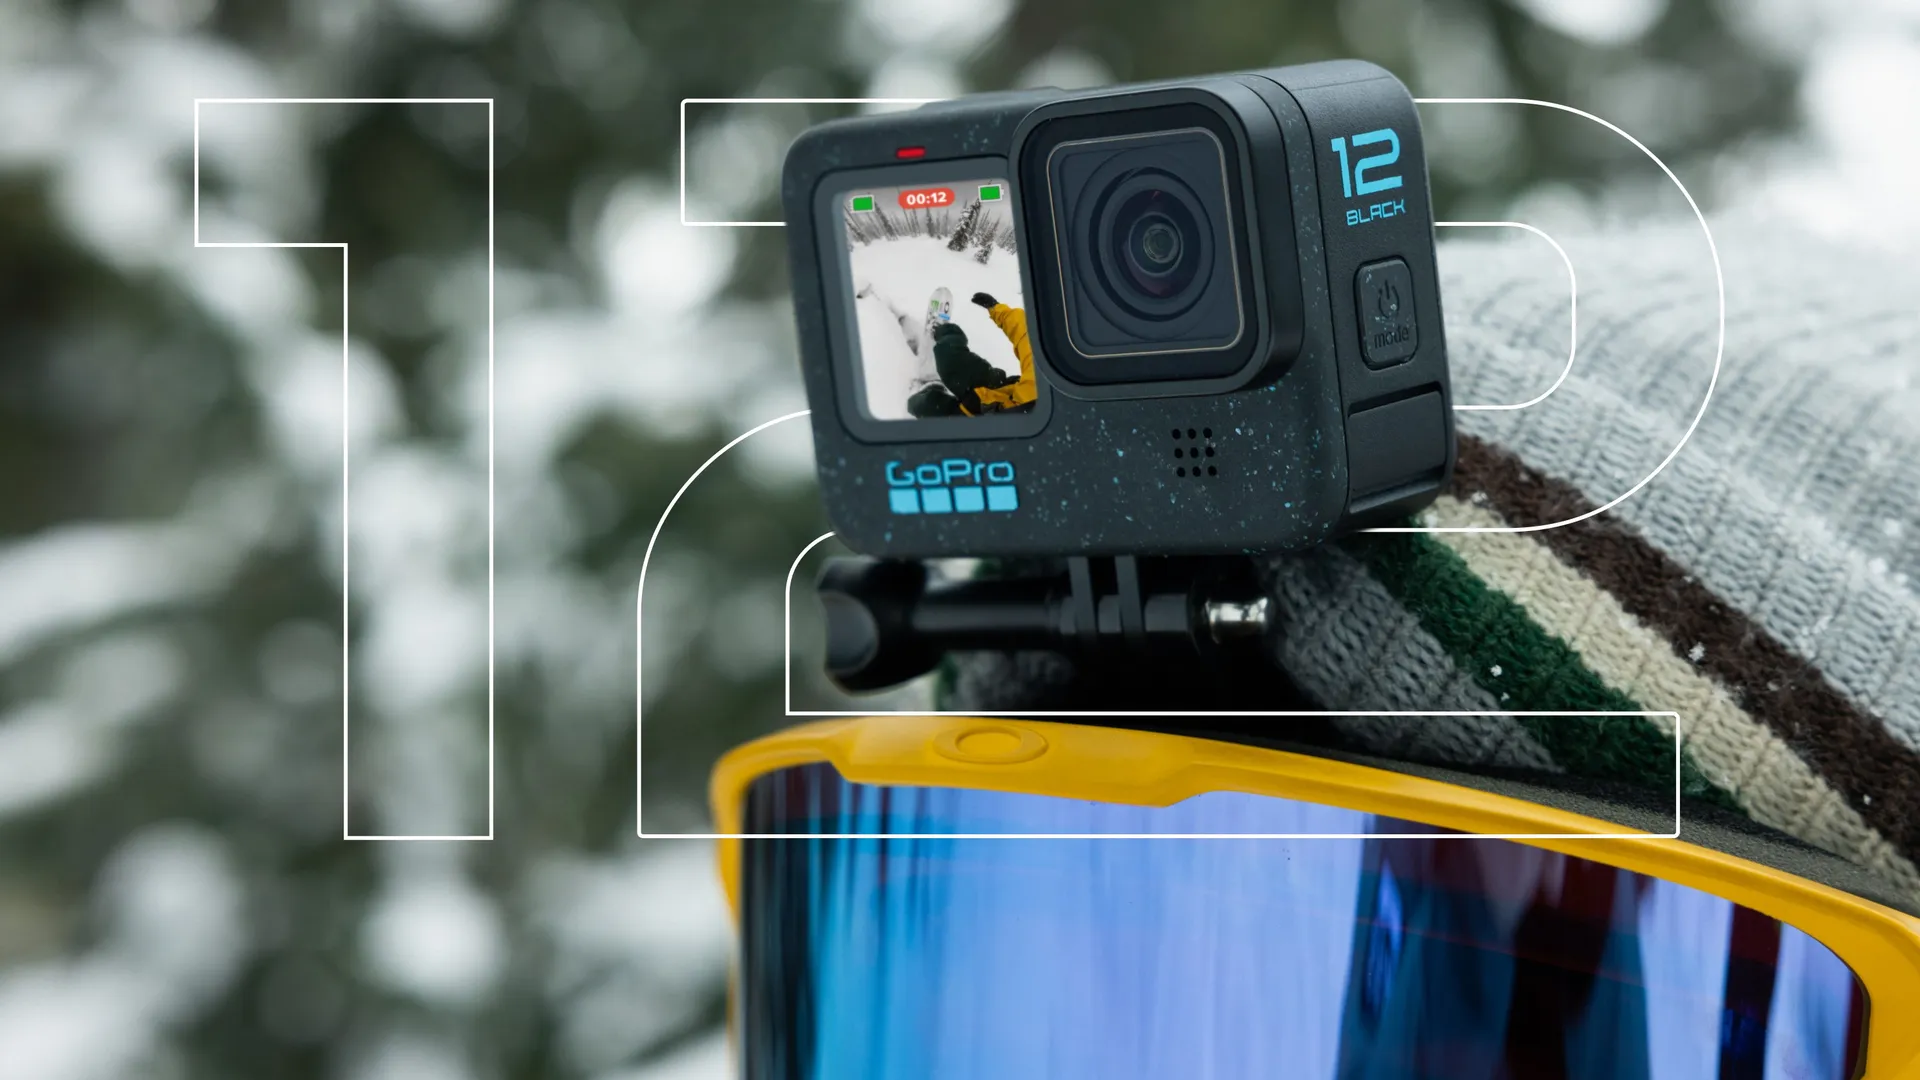 New Hero 12 Black from GoPro at 449.99 euros – photo